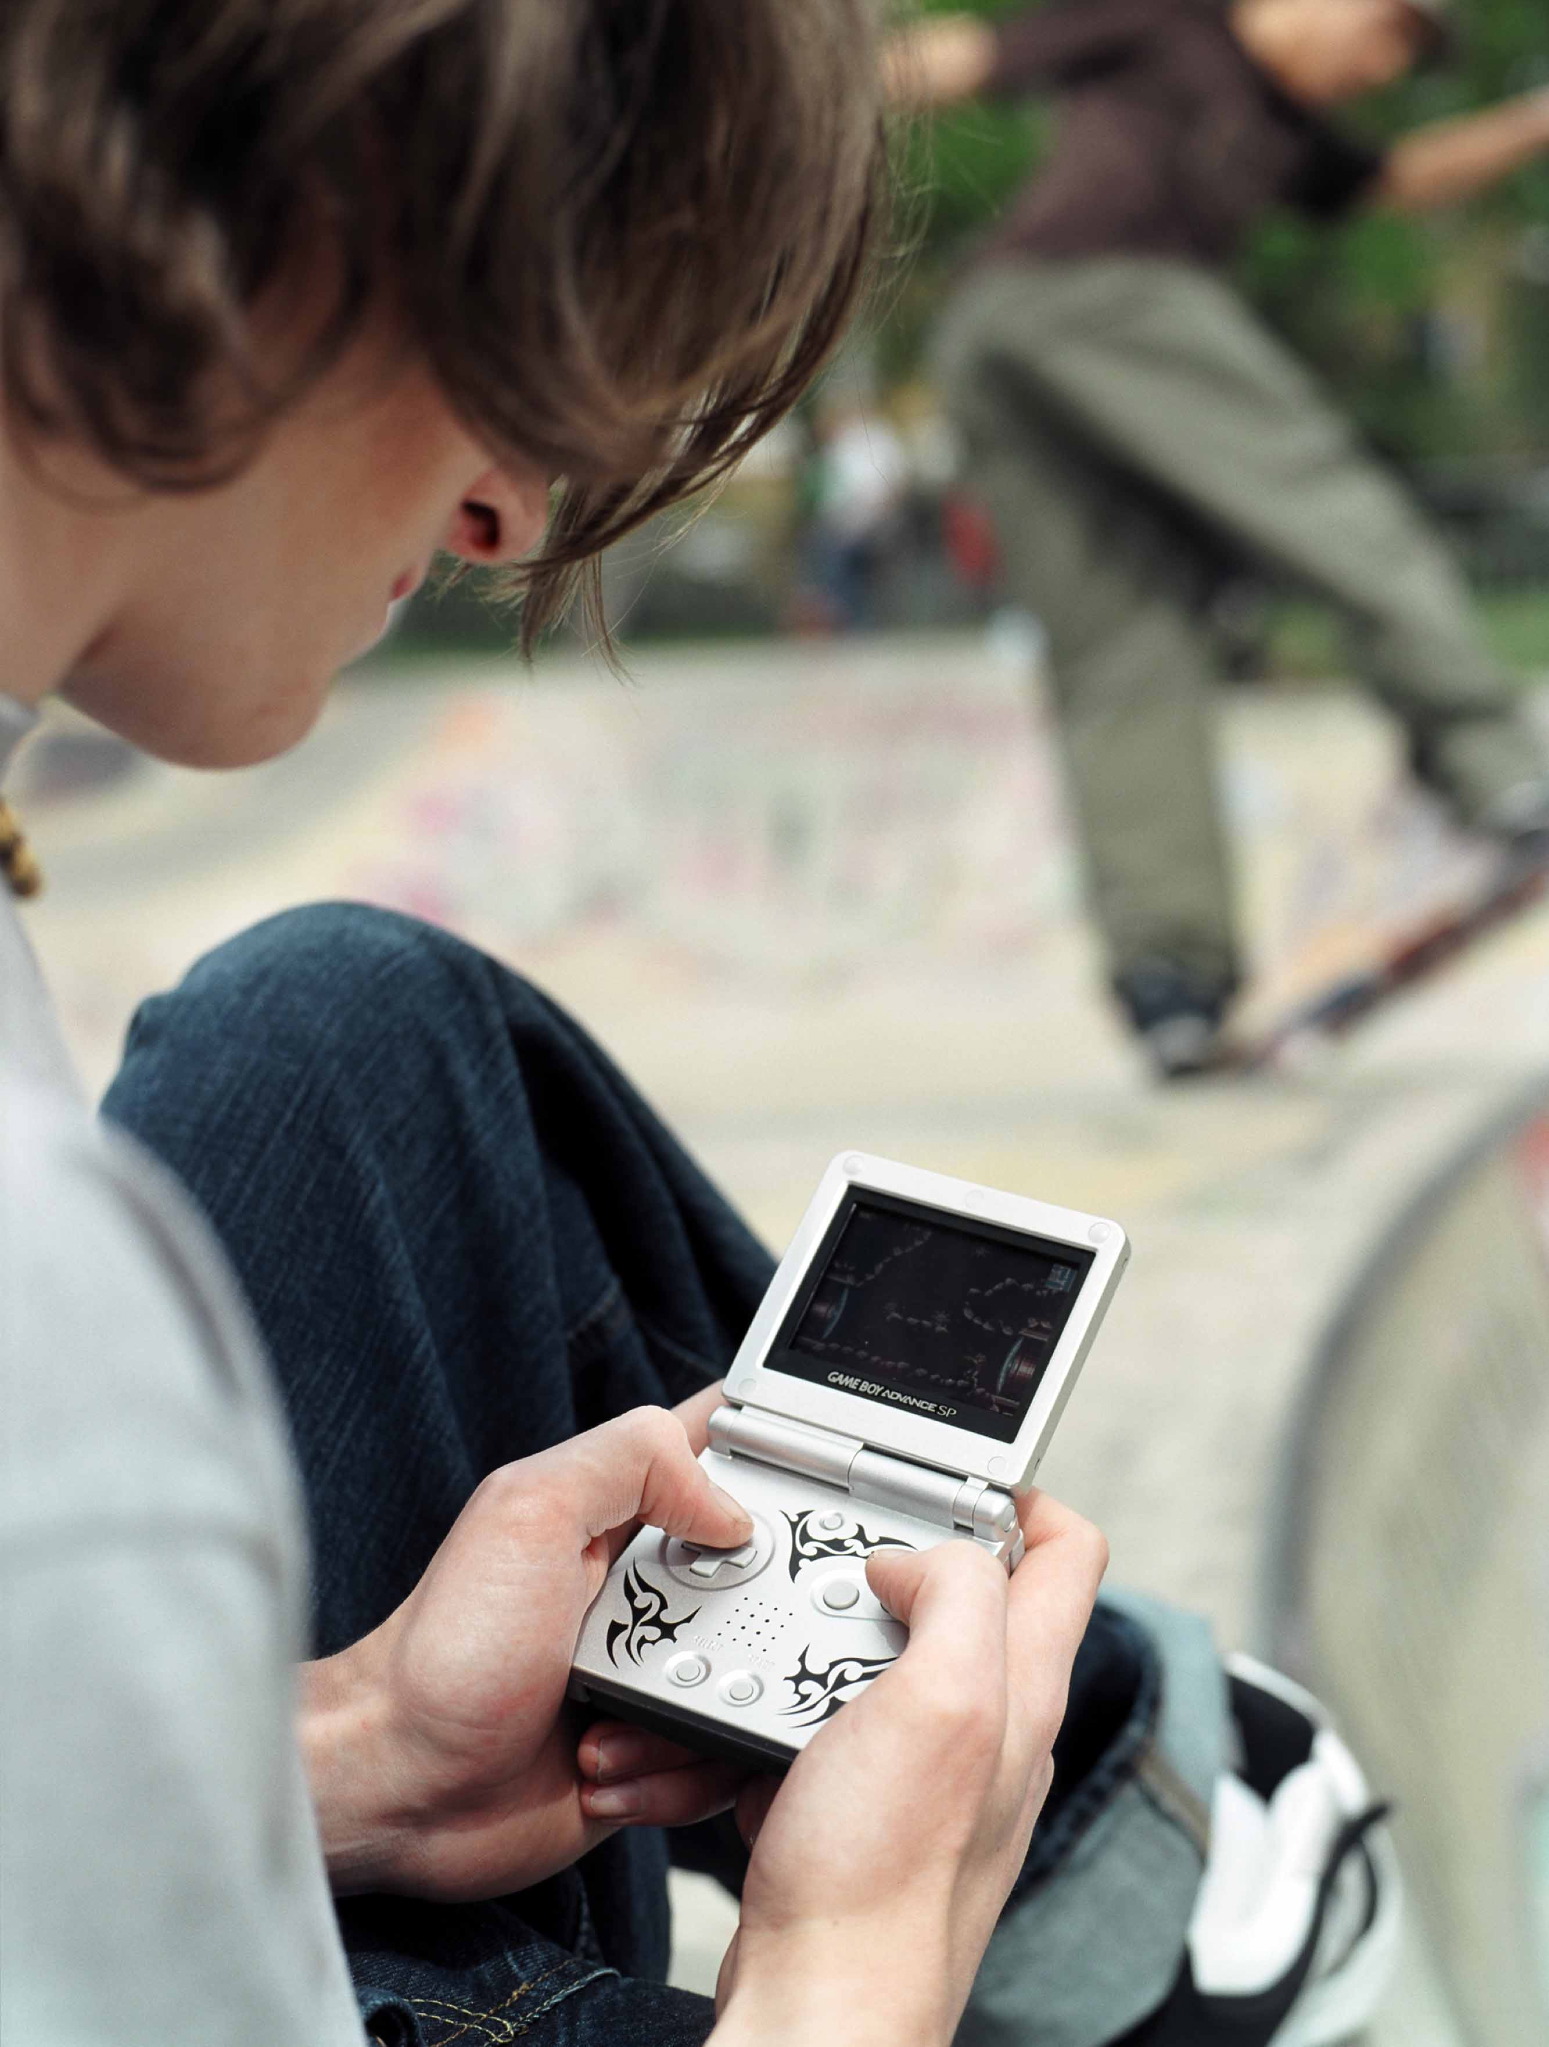 A man with a large nostril playing on a Game Boy Advance SP